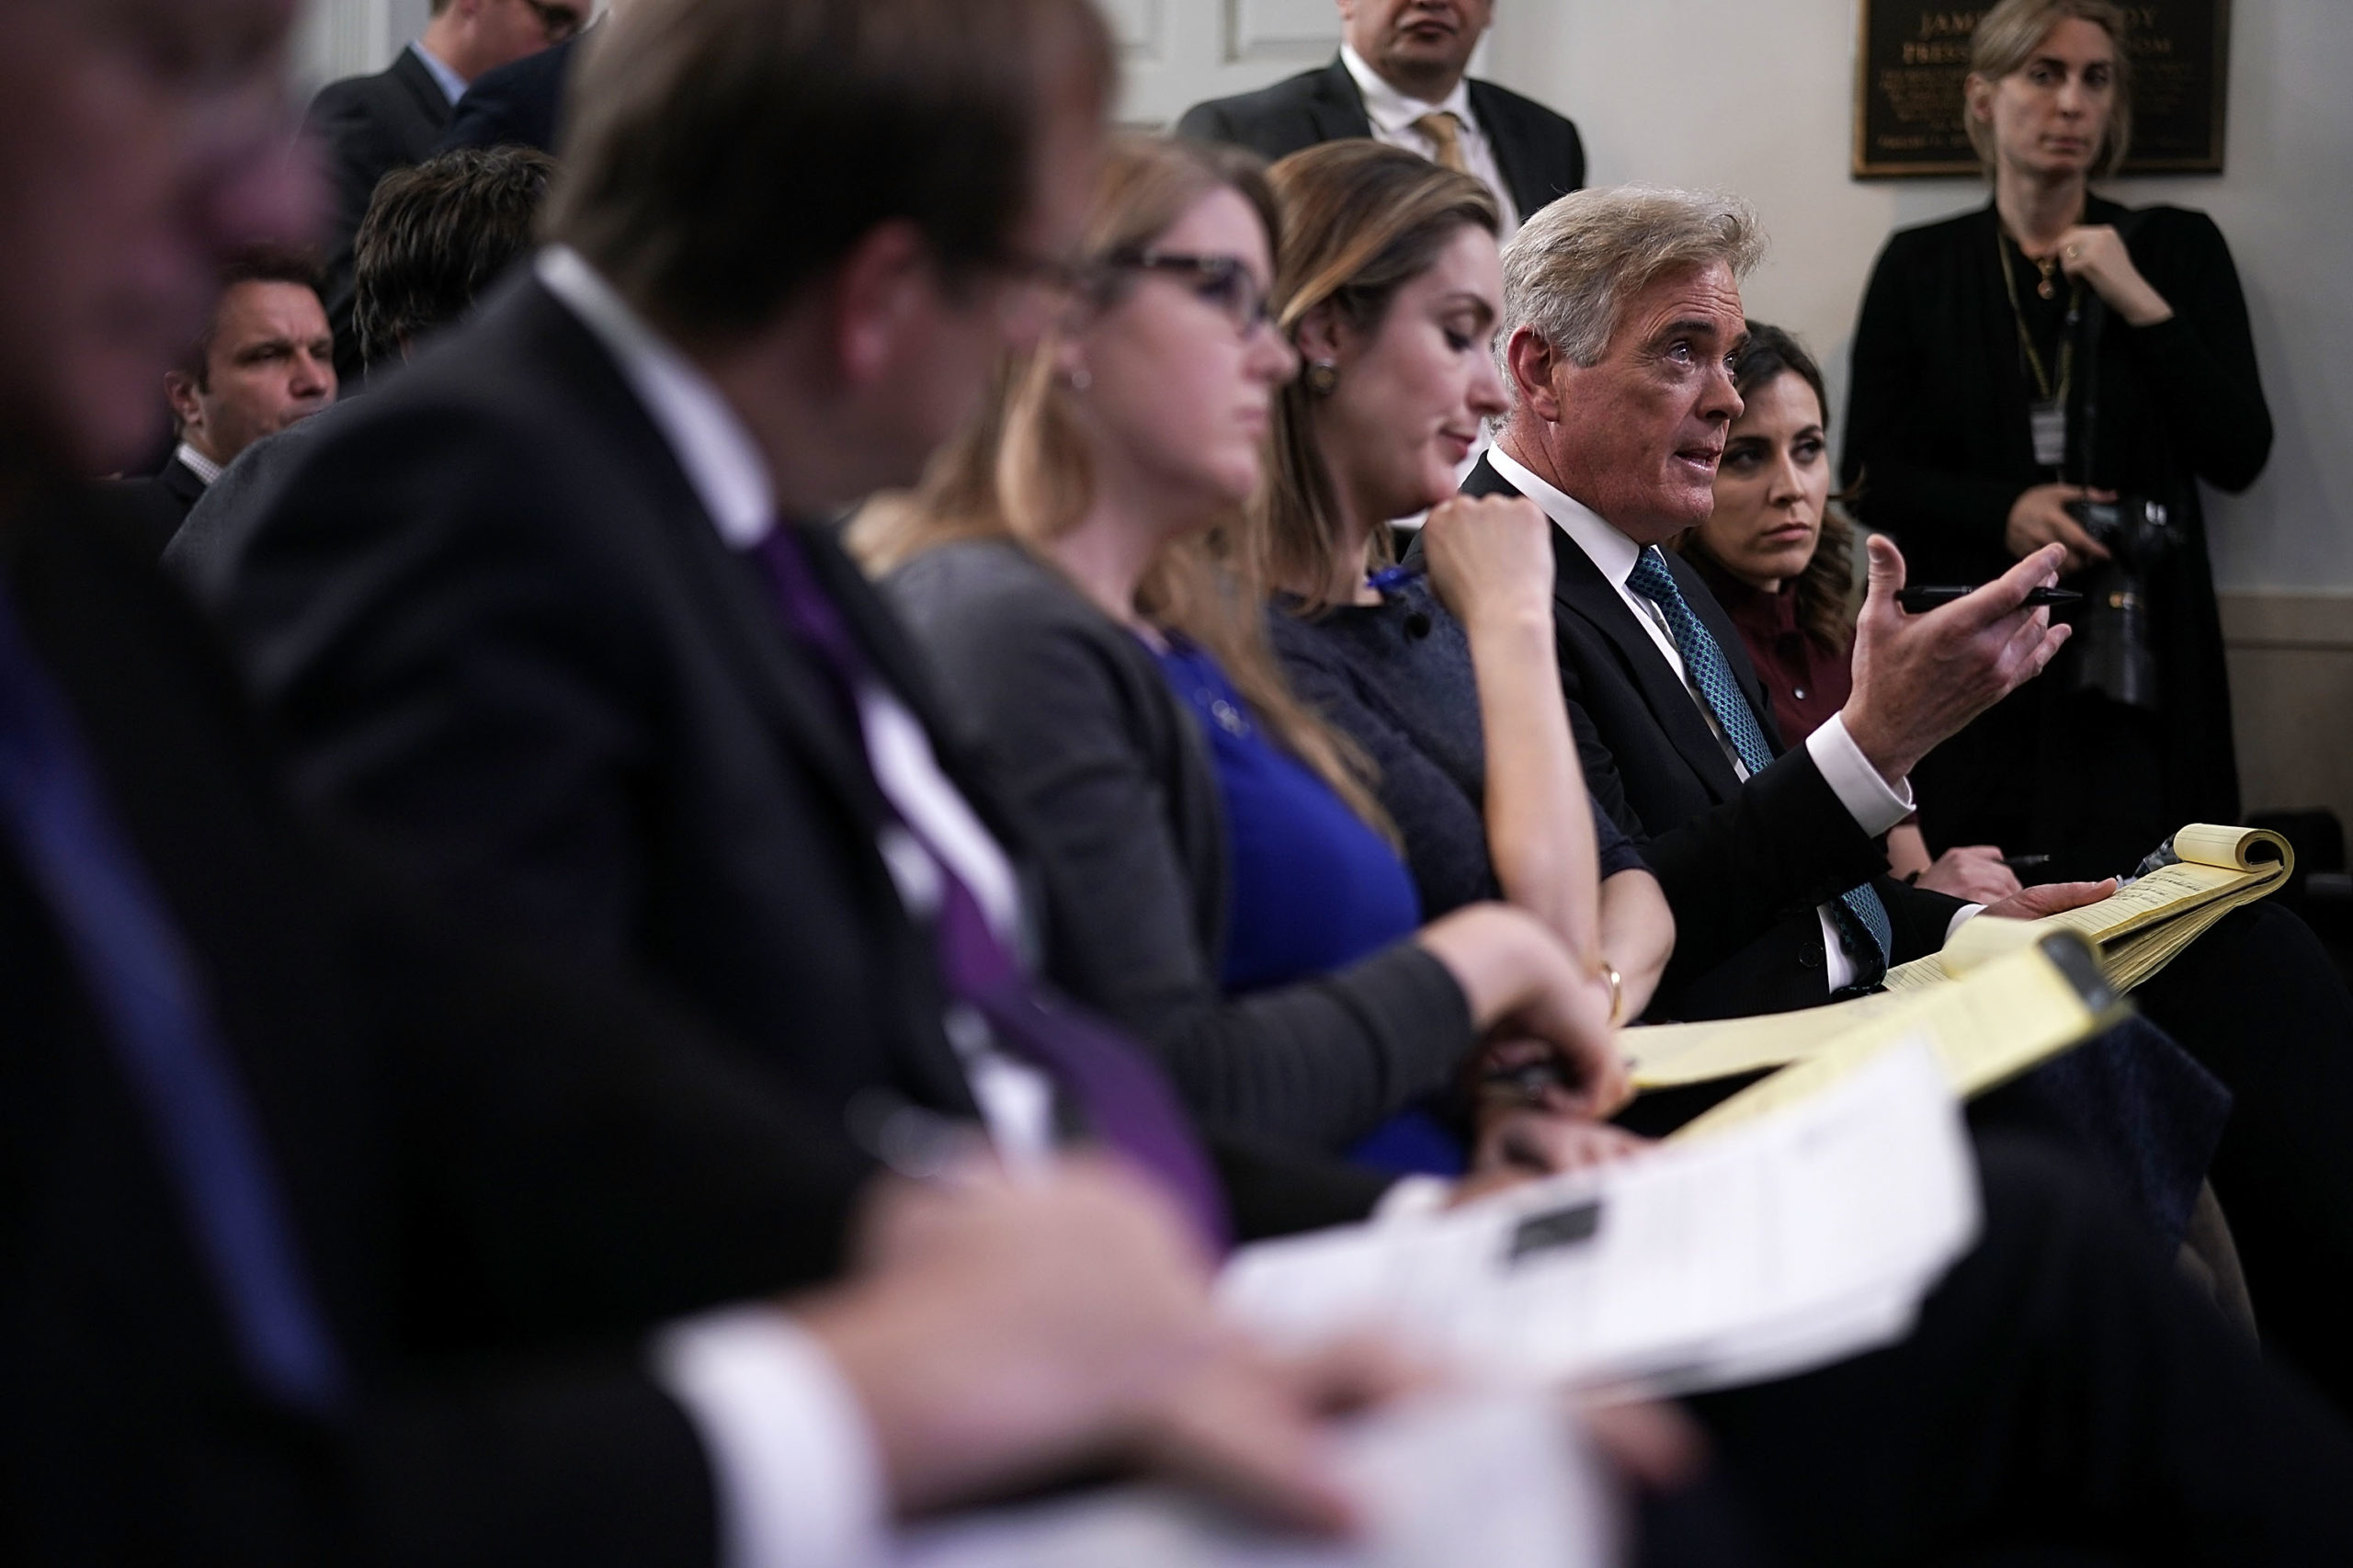 Fox News Chief White House Correspondent John Roberts asks a question during a daily news briefing in the James Brady Press Briefing Room of the White House February 27, 2018 in Washington, DC. (Alex Wong/Getty Images)